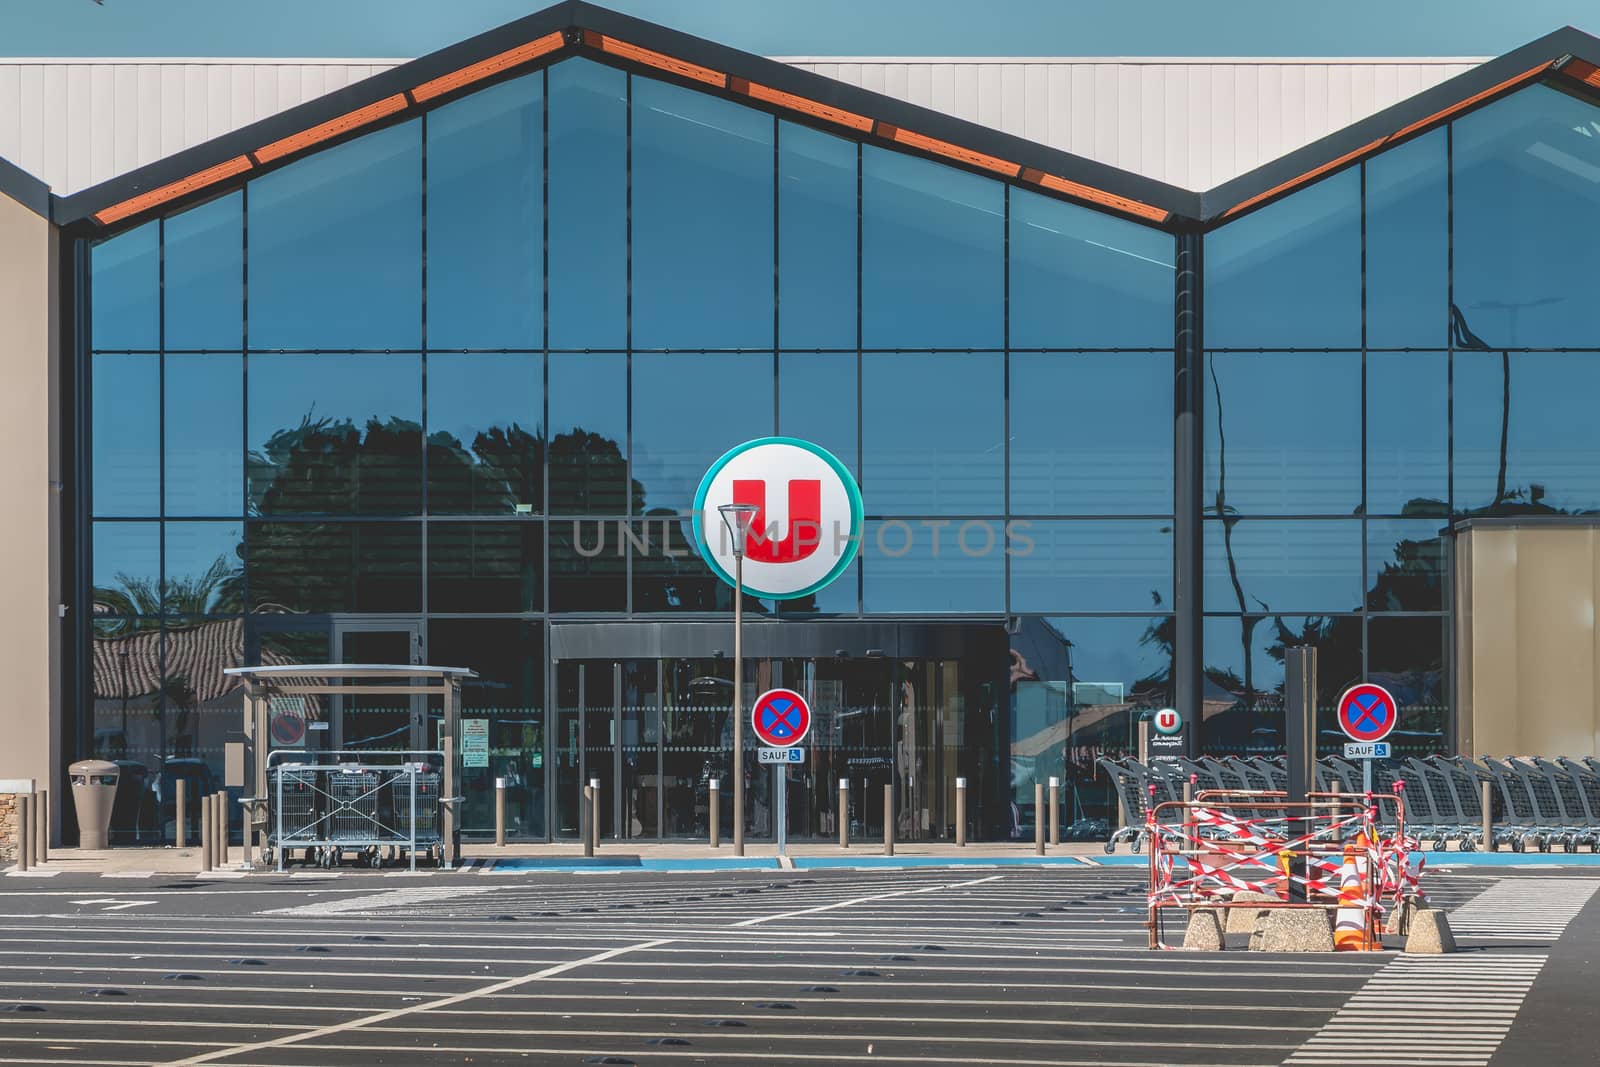 Bretignolles sur Mer, France - July 31, 2016: view of the entrance of a Super U store, a supermarket dependent on a cooperative of French retailers